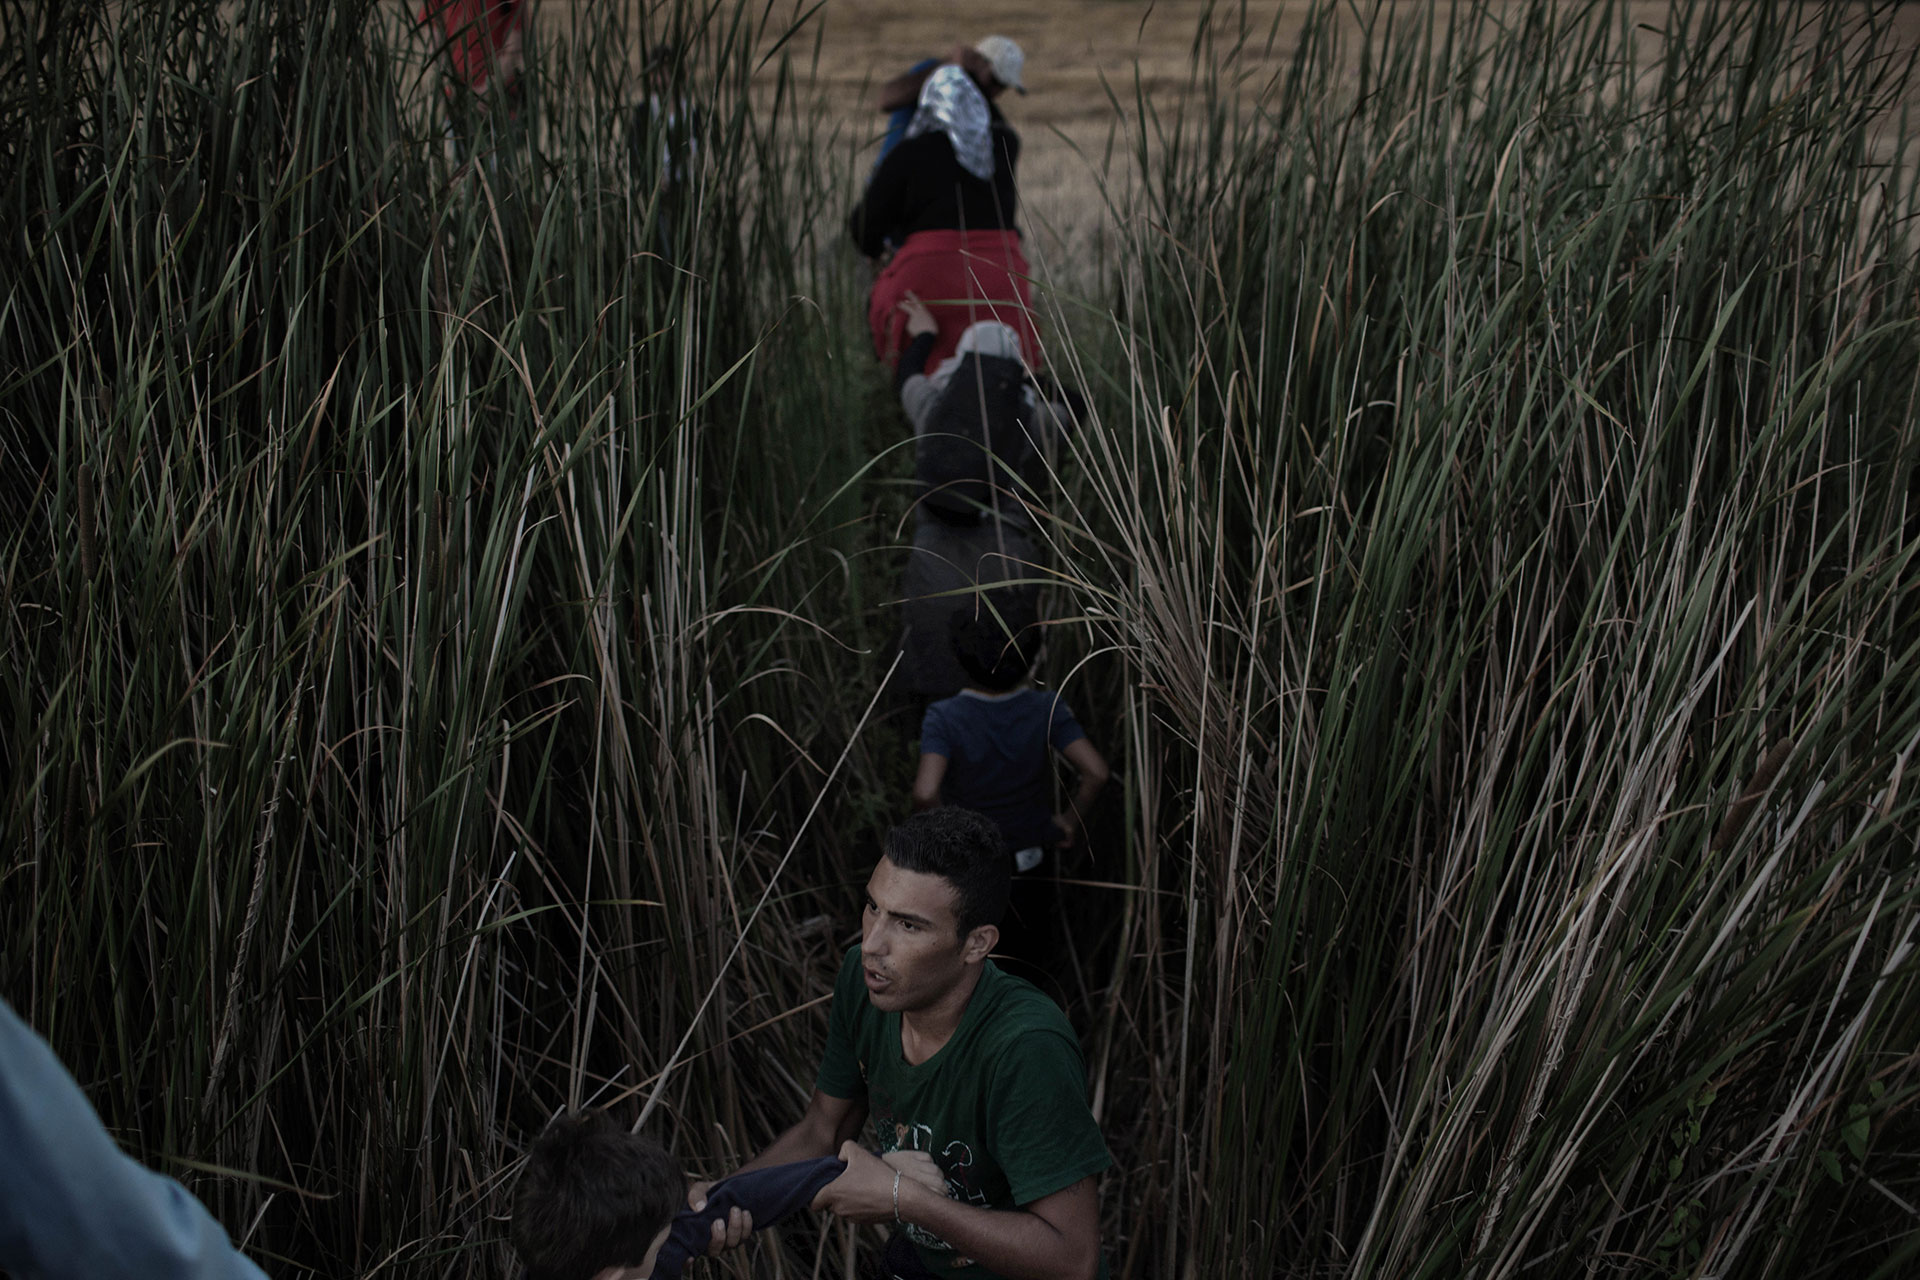 From Refugees on Balkan Route by Matej Povše as part of Balkan Trails